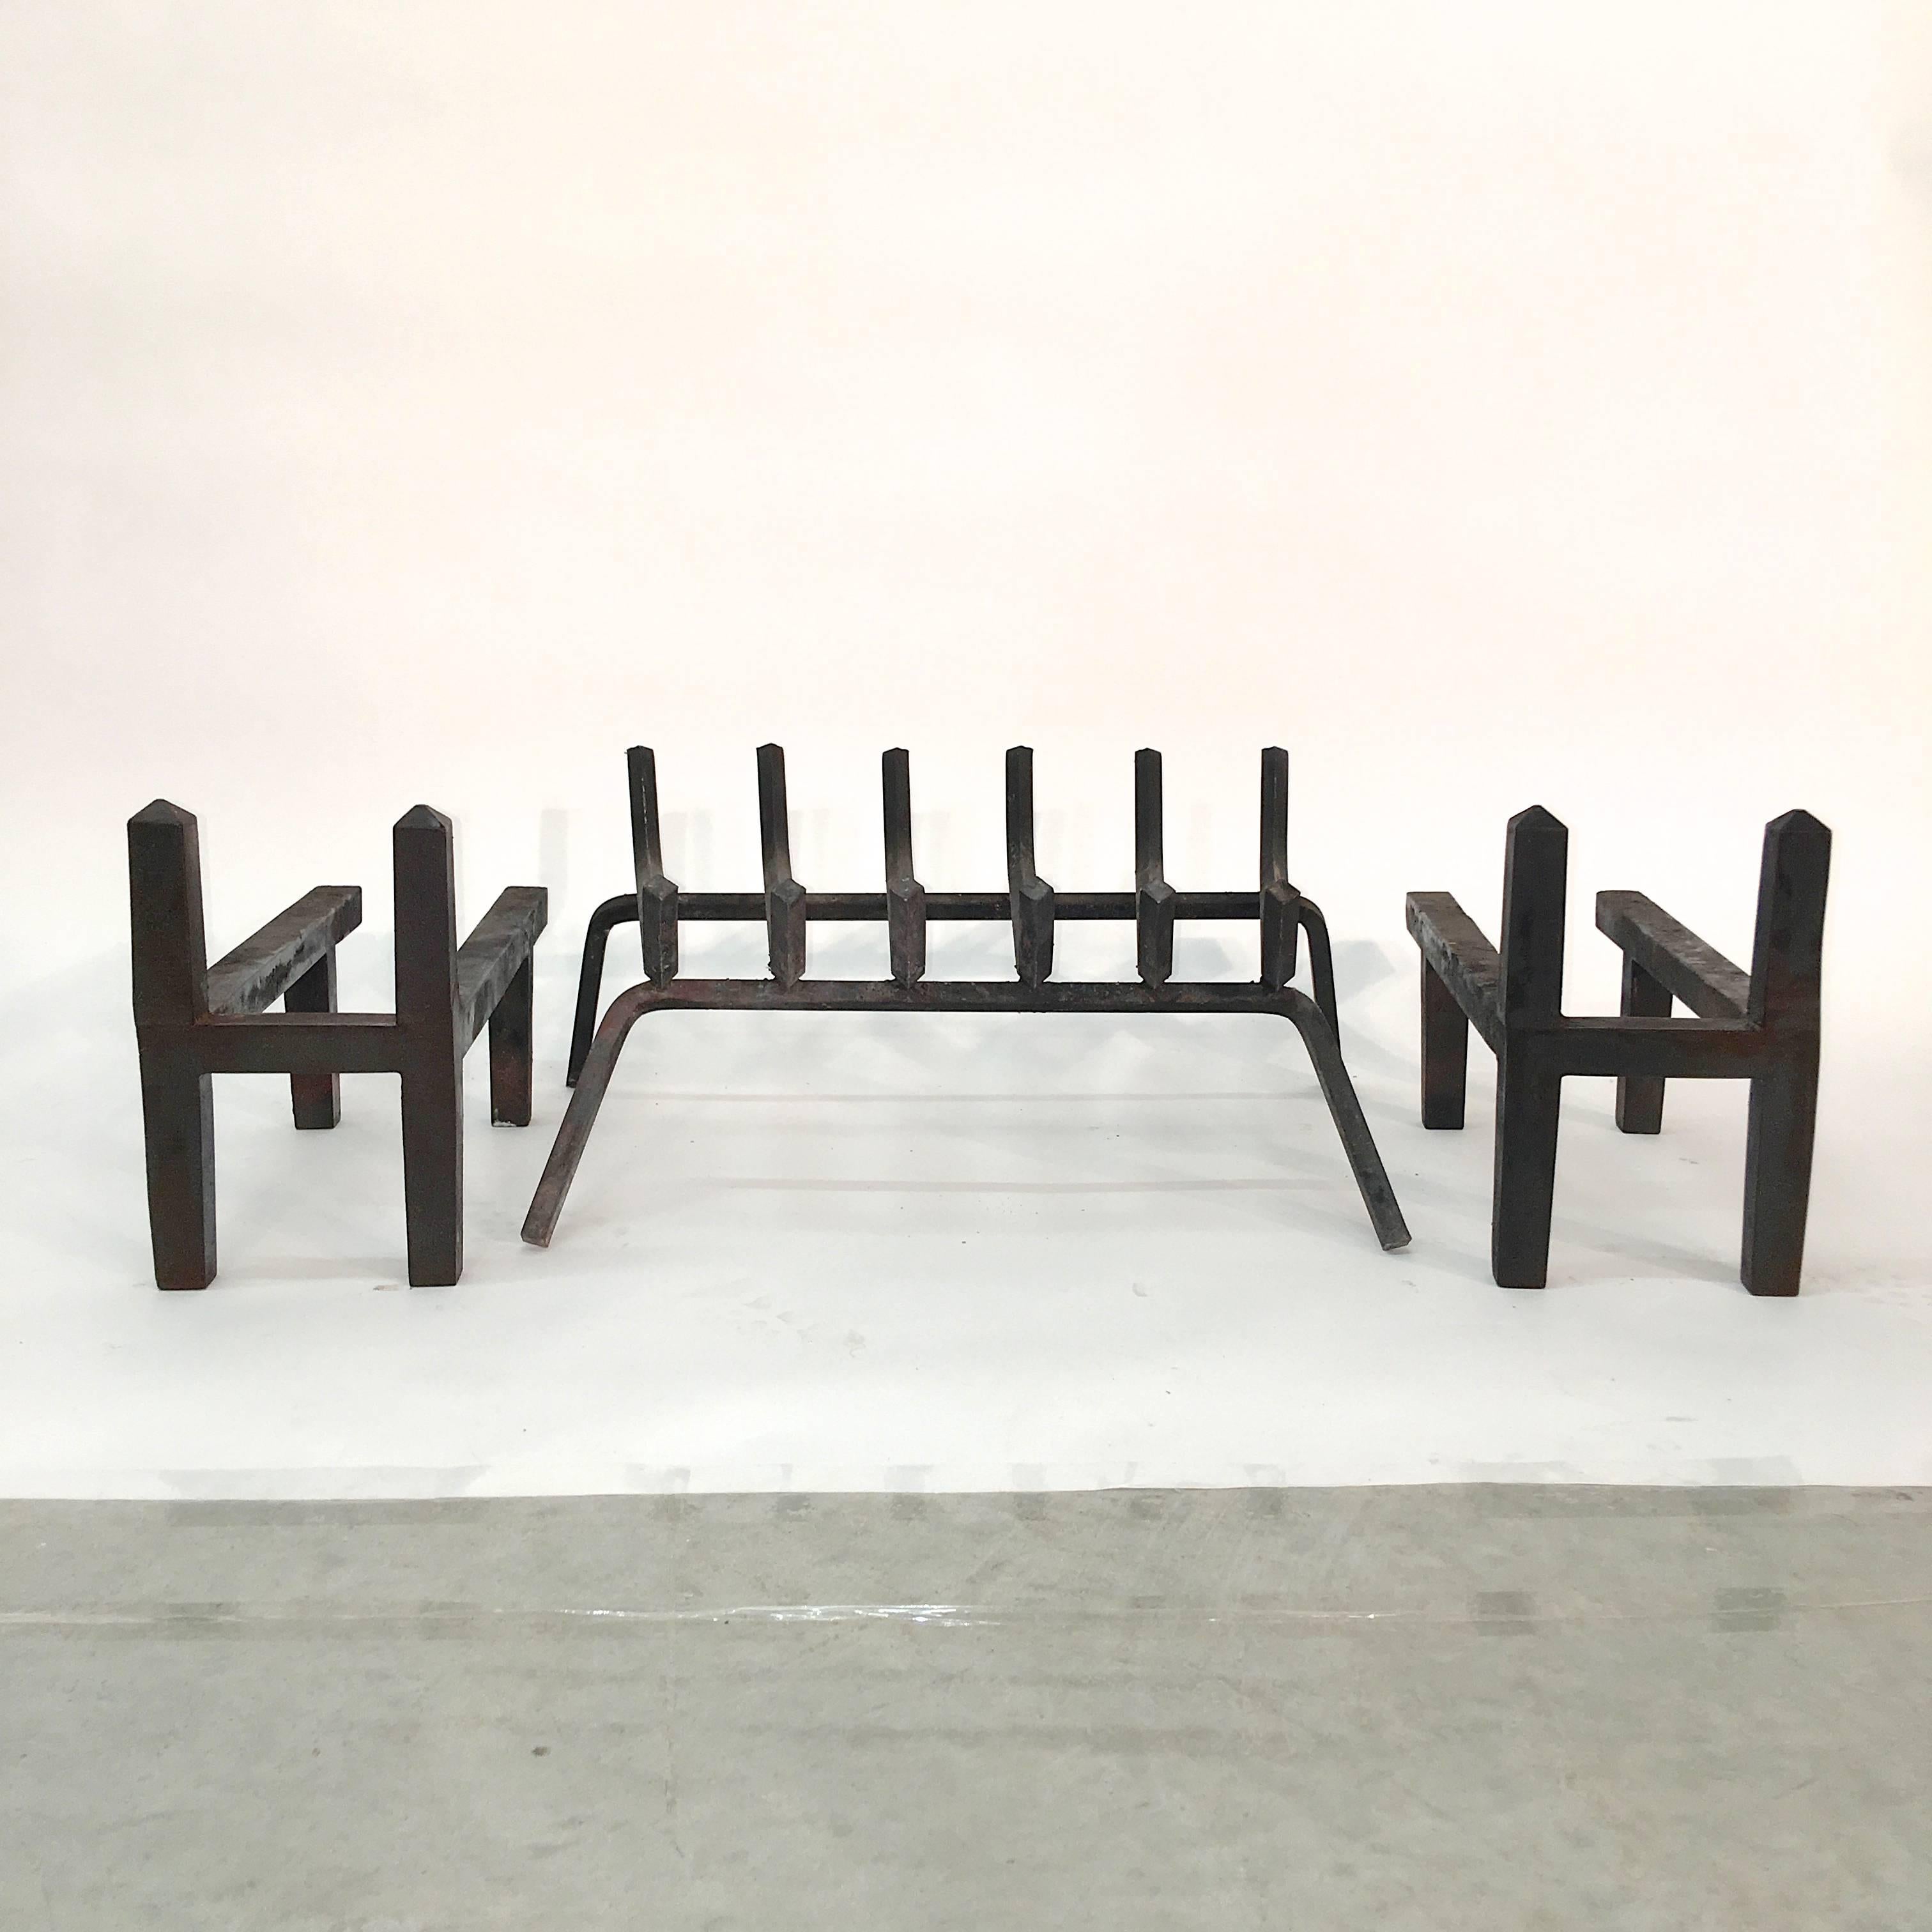 This is an original set of cast iron H-form andirons or chenets labelled Wm. H. Jackson Co. together with the original cast iron fire log basket. Late 1940s-early 1950s minimalist modern design. This company has been srafting some of the most